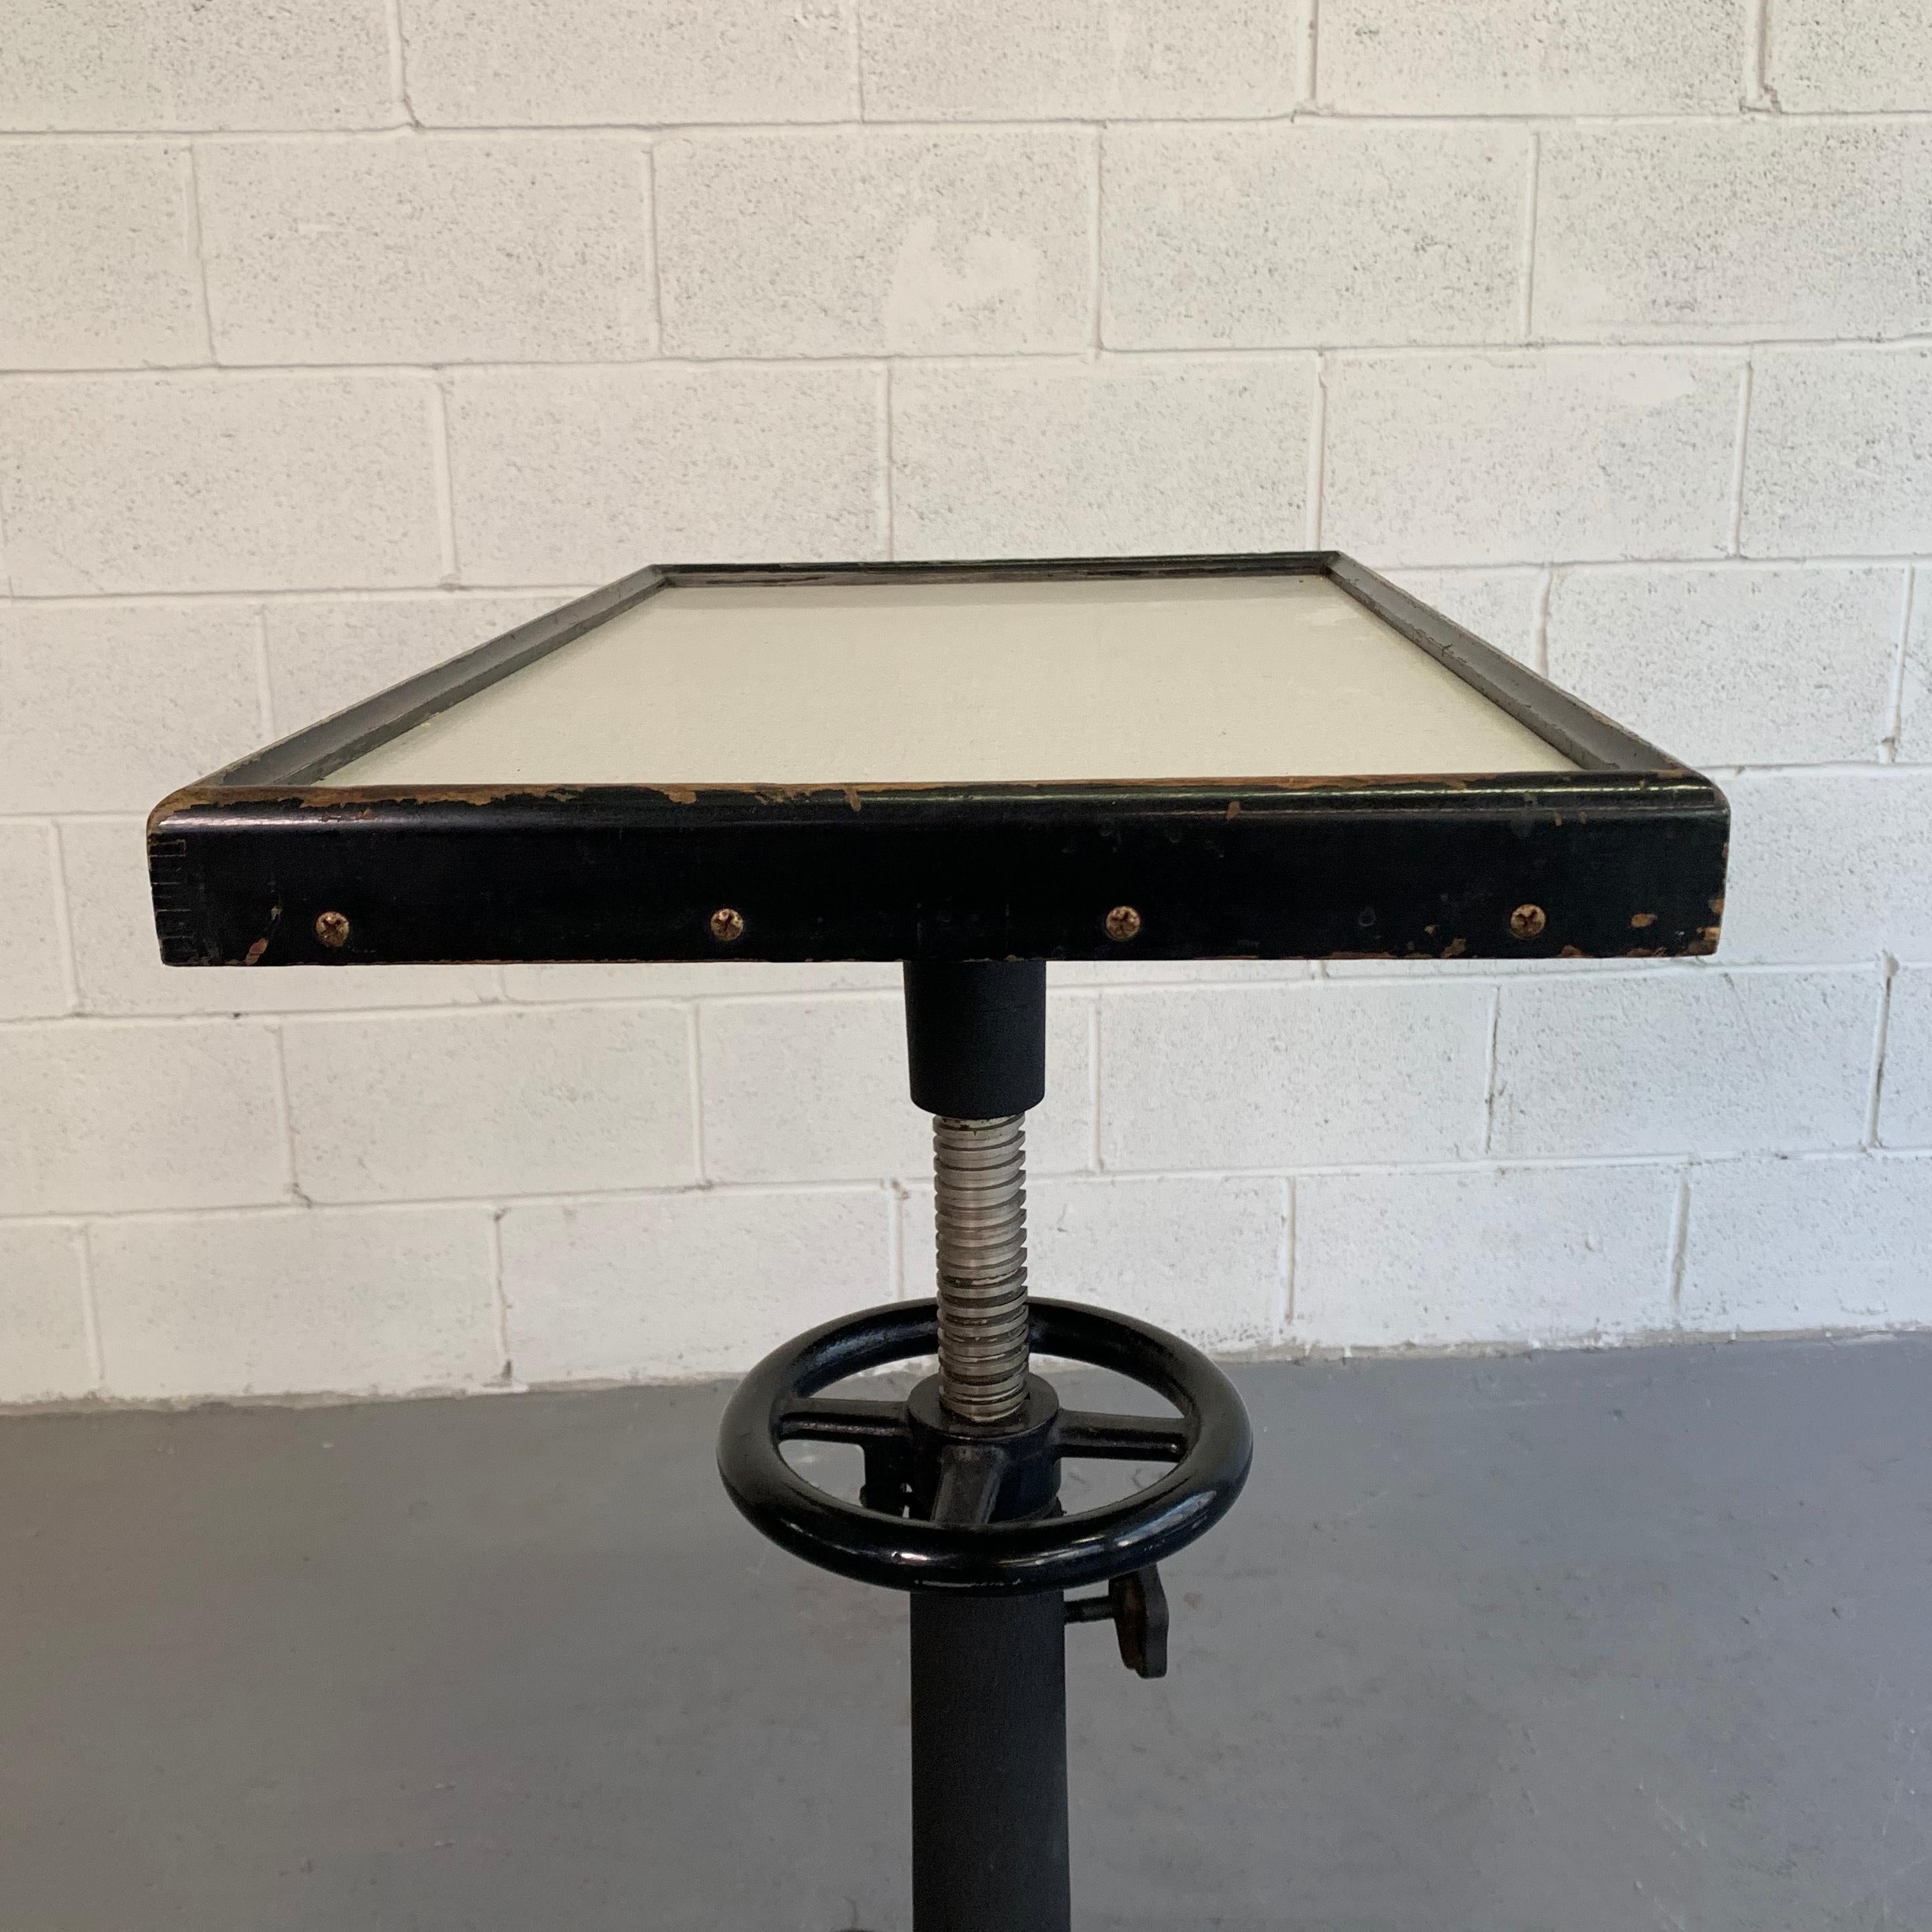 20th Century Industrial Optometry Examination Pedestal Table by Bausch & Lomb